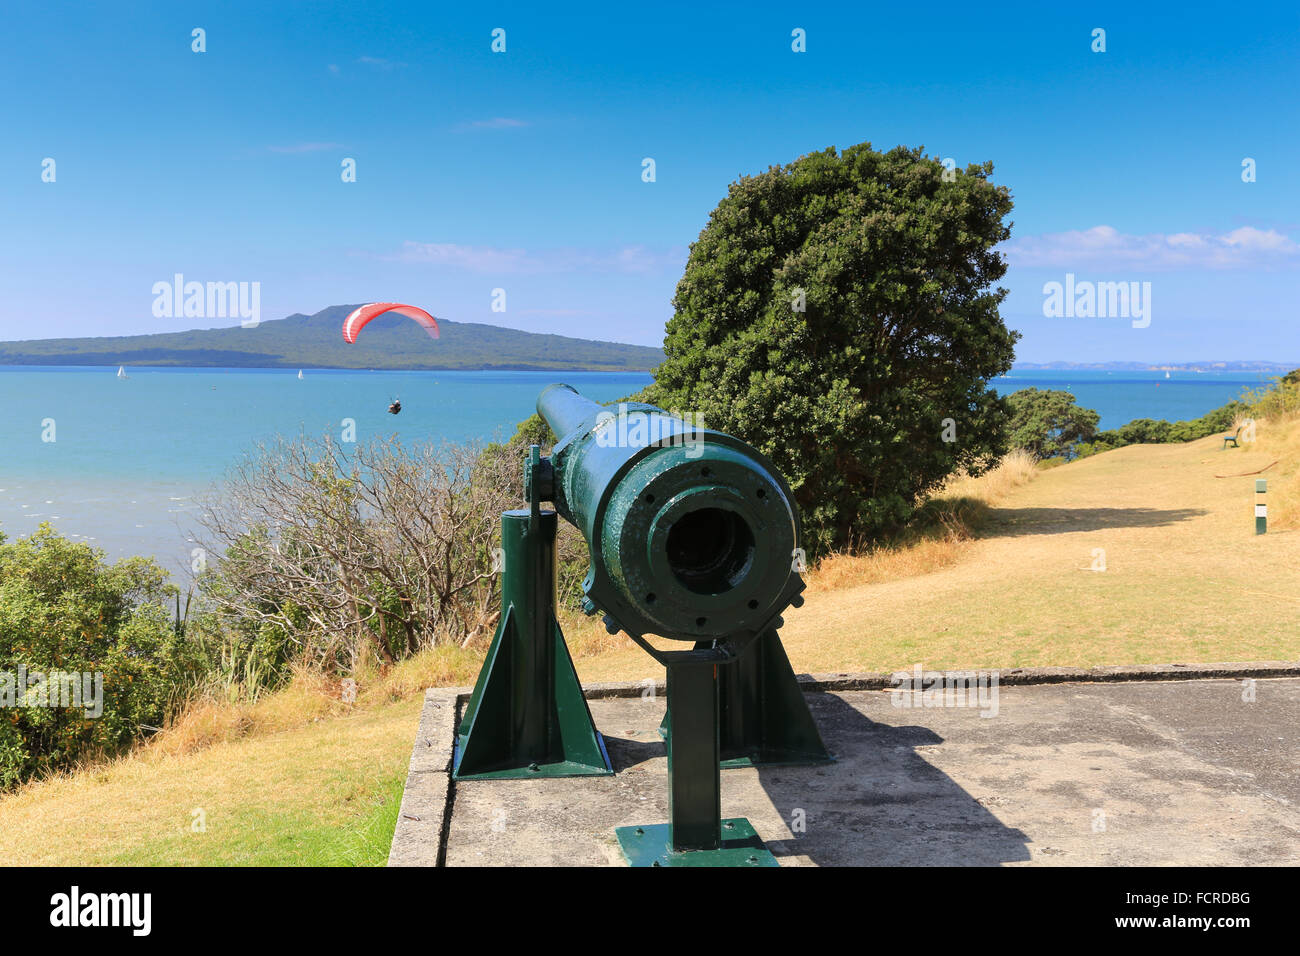 An old 6-inch disappearing gun and paraglider at Hauraki Gulf Maritime Park at Devonport, Auckland, New Zealand. Stock Photo